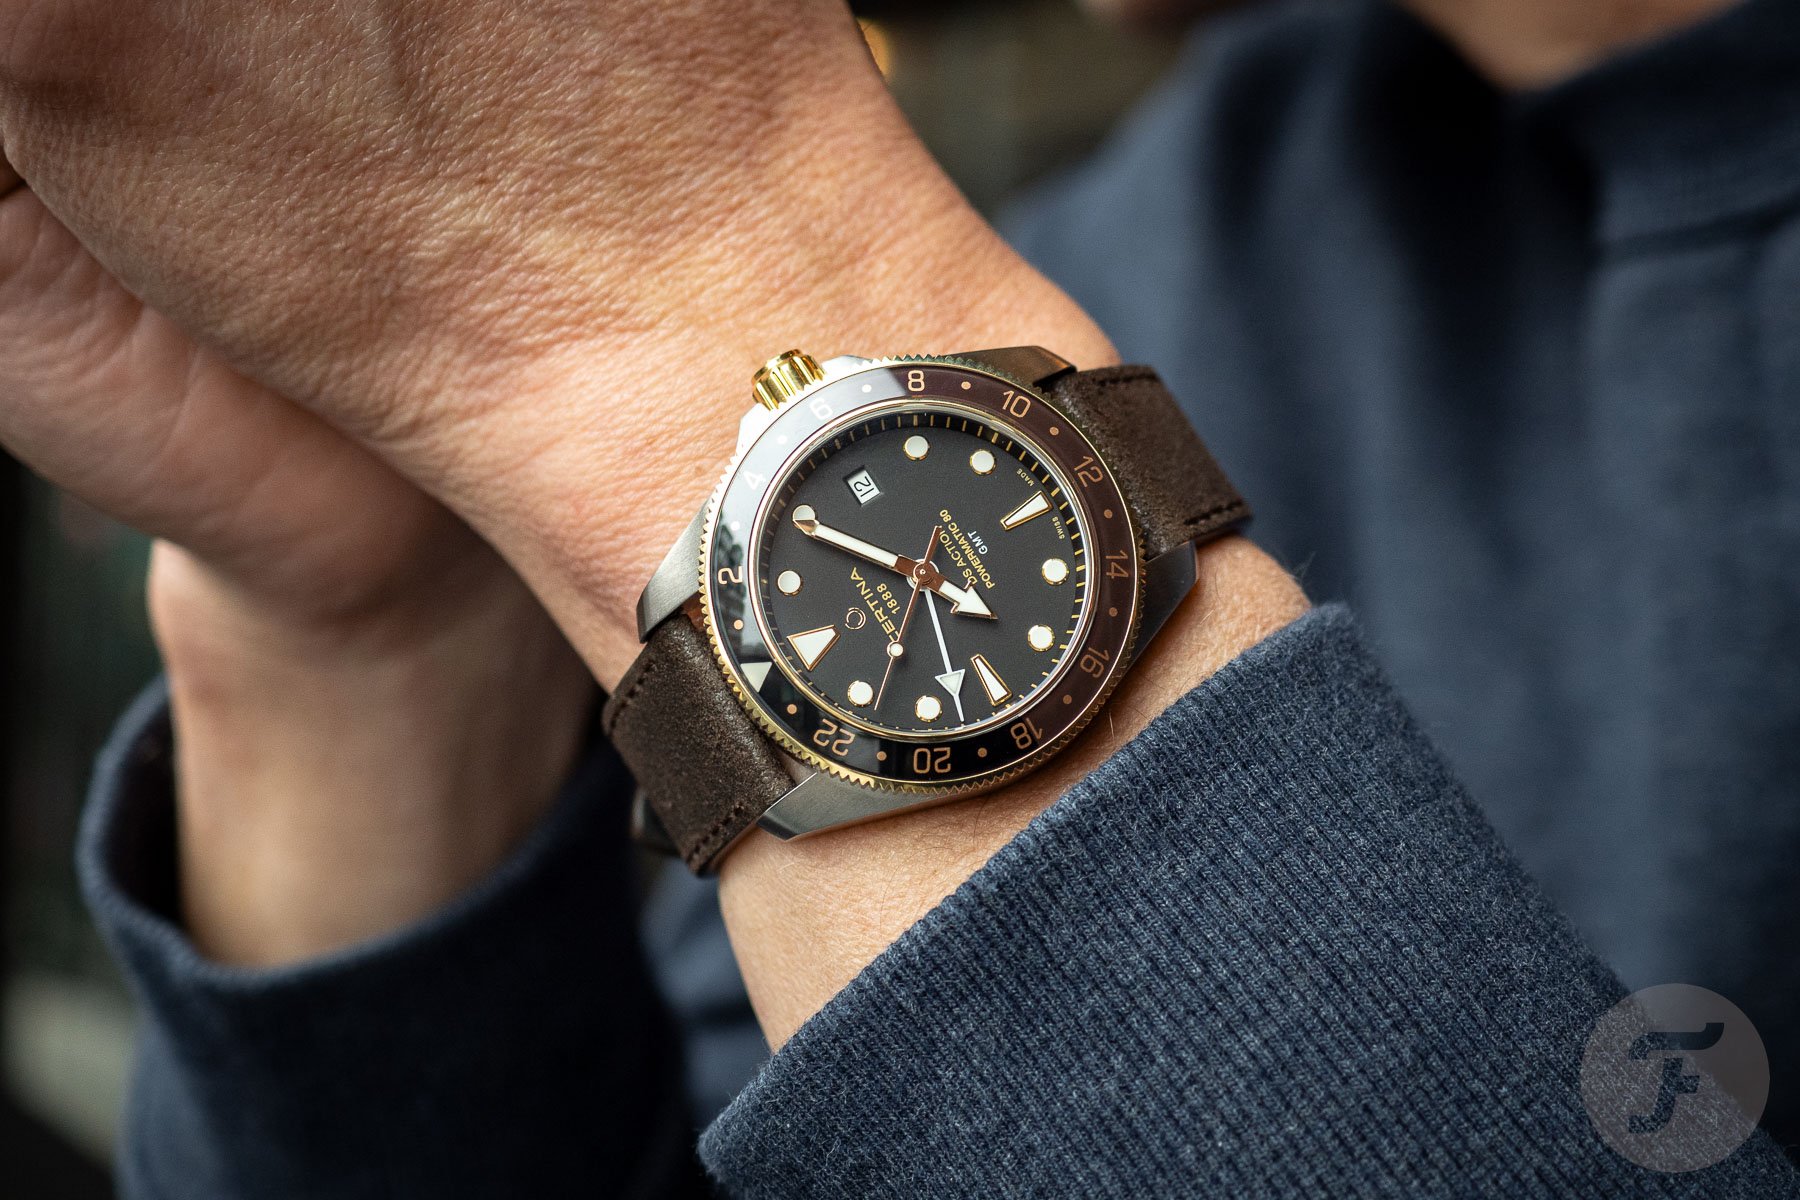 Worn & Wound And Christopher Ward Collaborate On Limited-Edition C65 Sandstorm & C65 Sandstorm Blackout